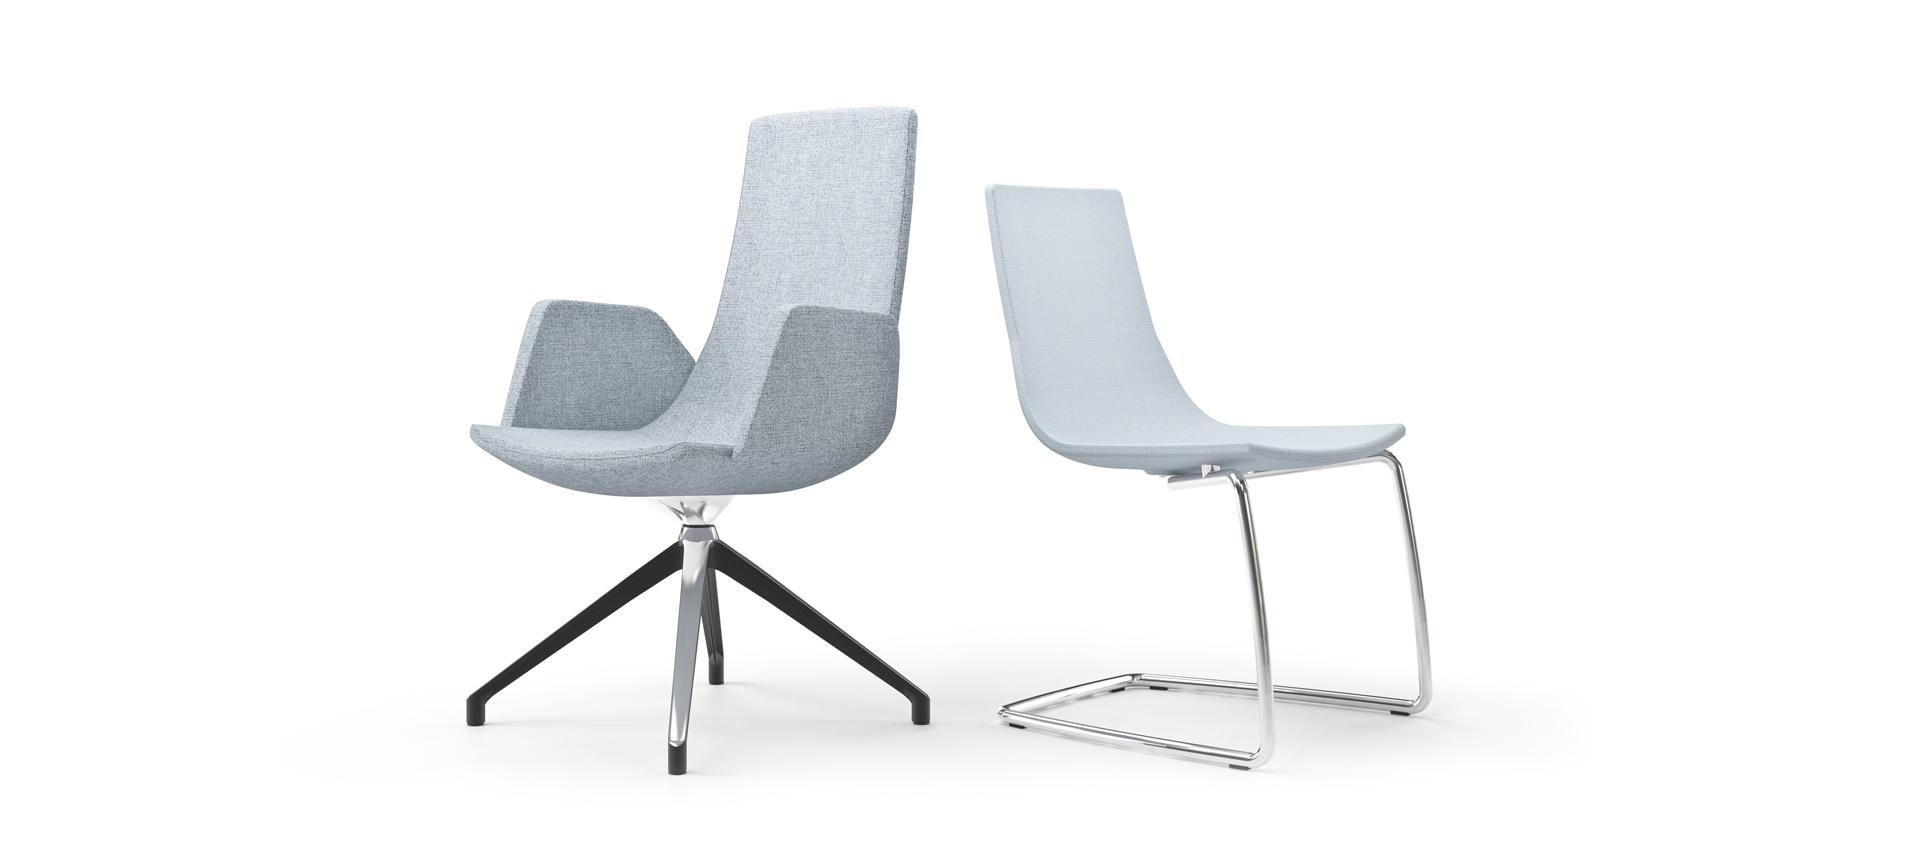 North Cape fabric meeting chairs